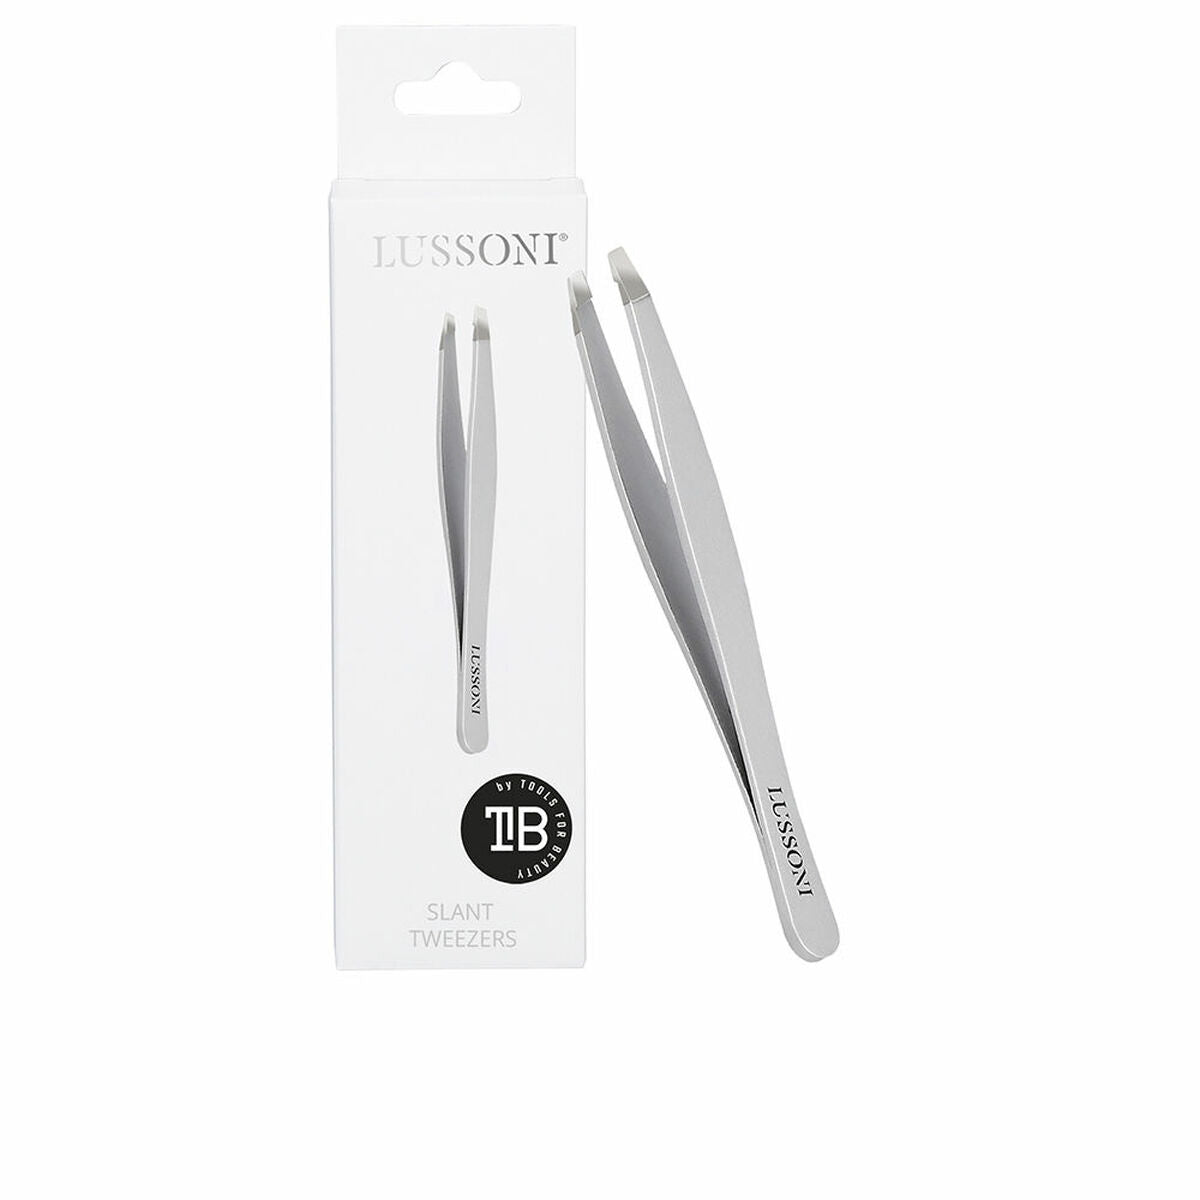 Tweezers for Plucking Lussoni Angled point